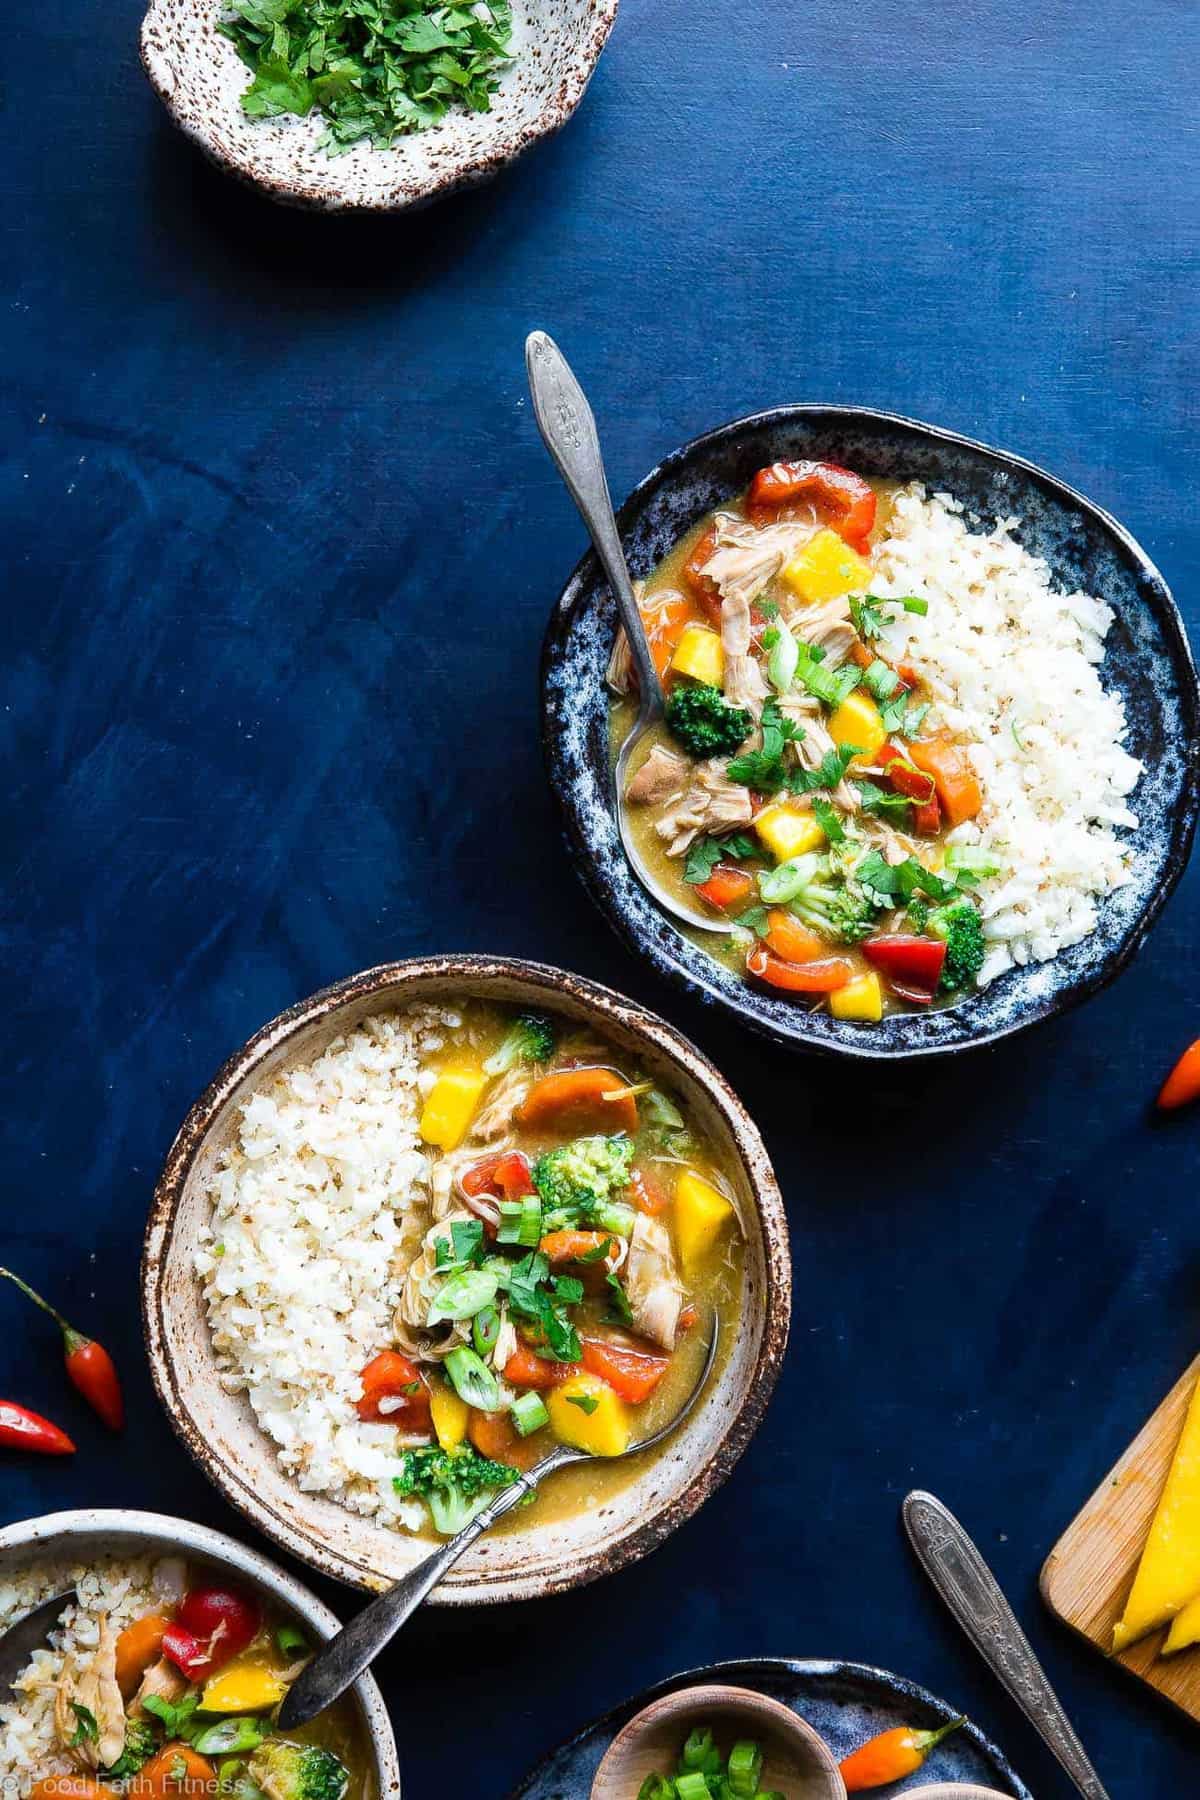 Whole30 Slow Cooker Mango Chicken Curry- An easy, healthy family-friendly weeknight dinner where the slow cooker does all the work for you! Gluten free and paleo/whole30 compliant too! Makes DELICIOUS leftovers for meal prep! | #Foodfaithfitness | #Glutenfree #Healthy #Paleo #Whole30 #Curry